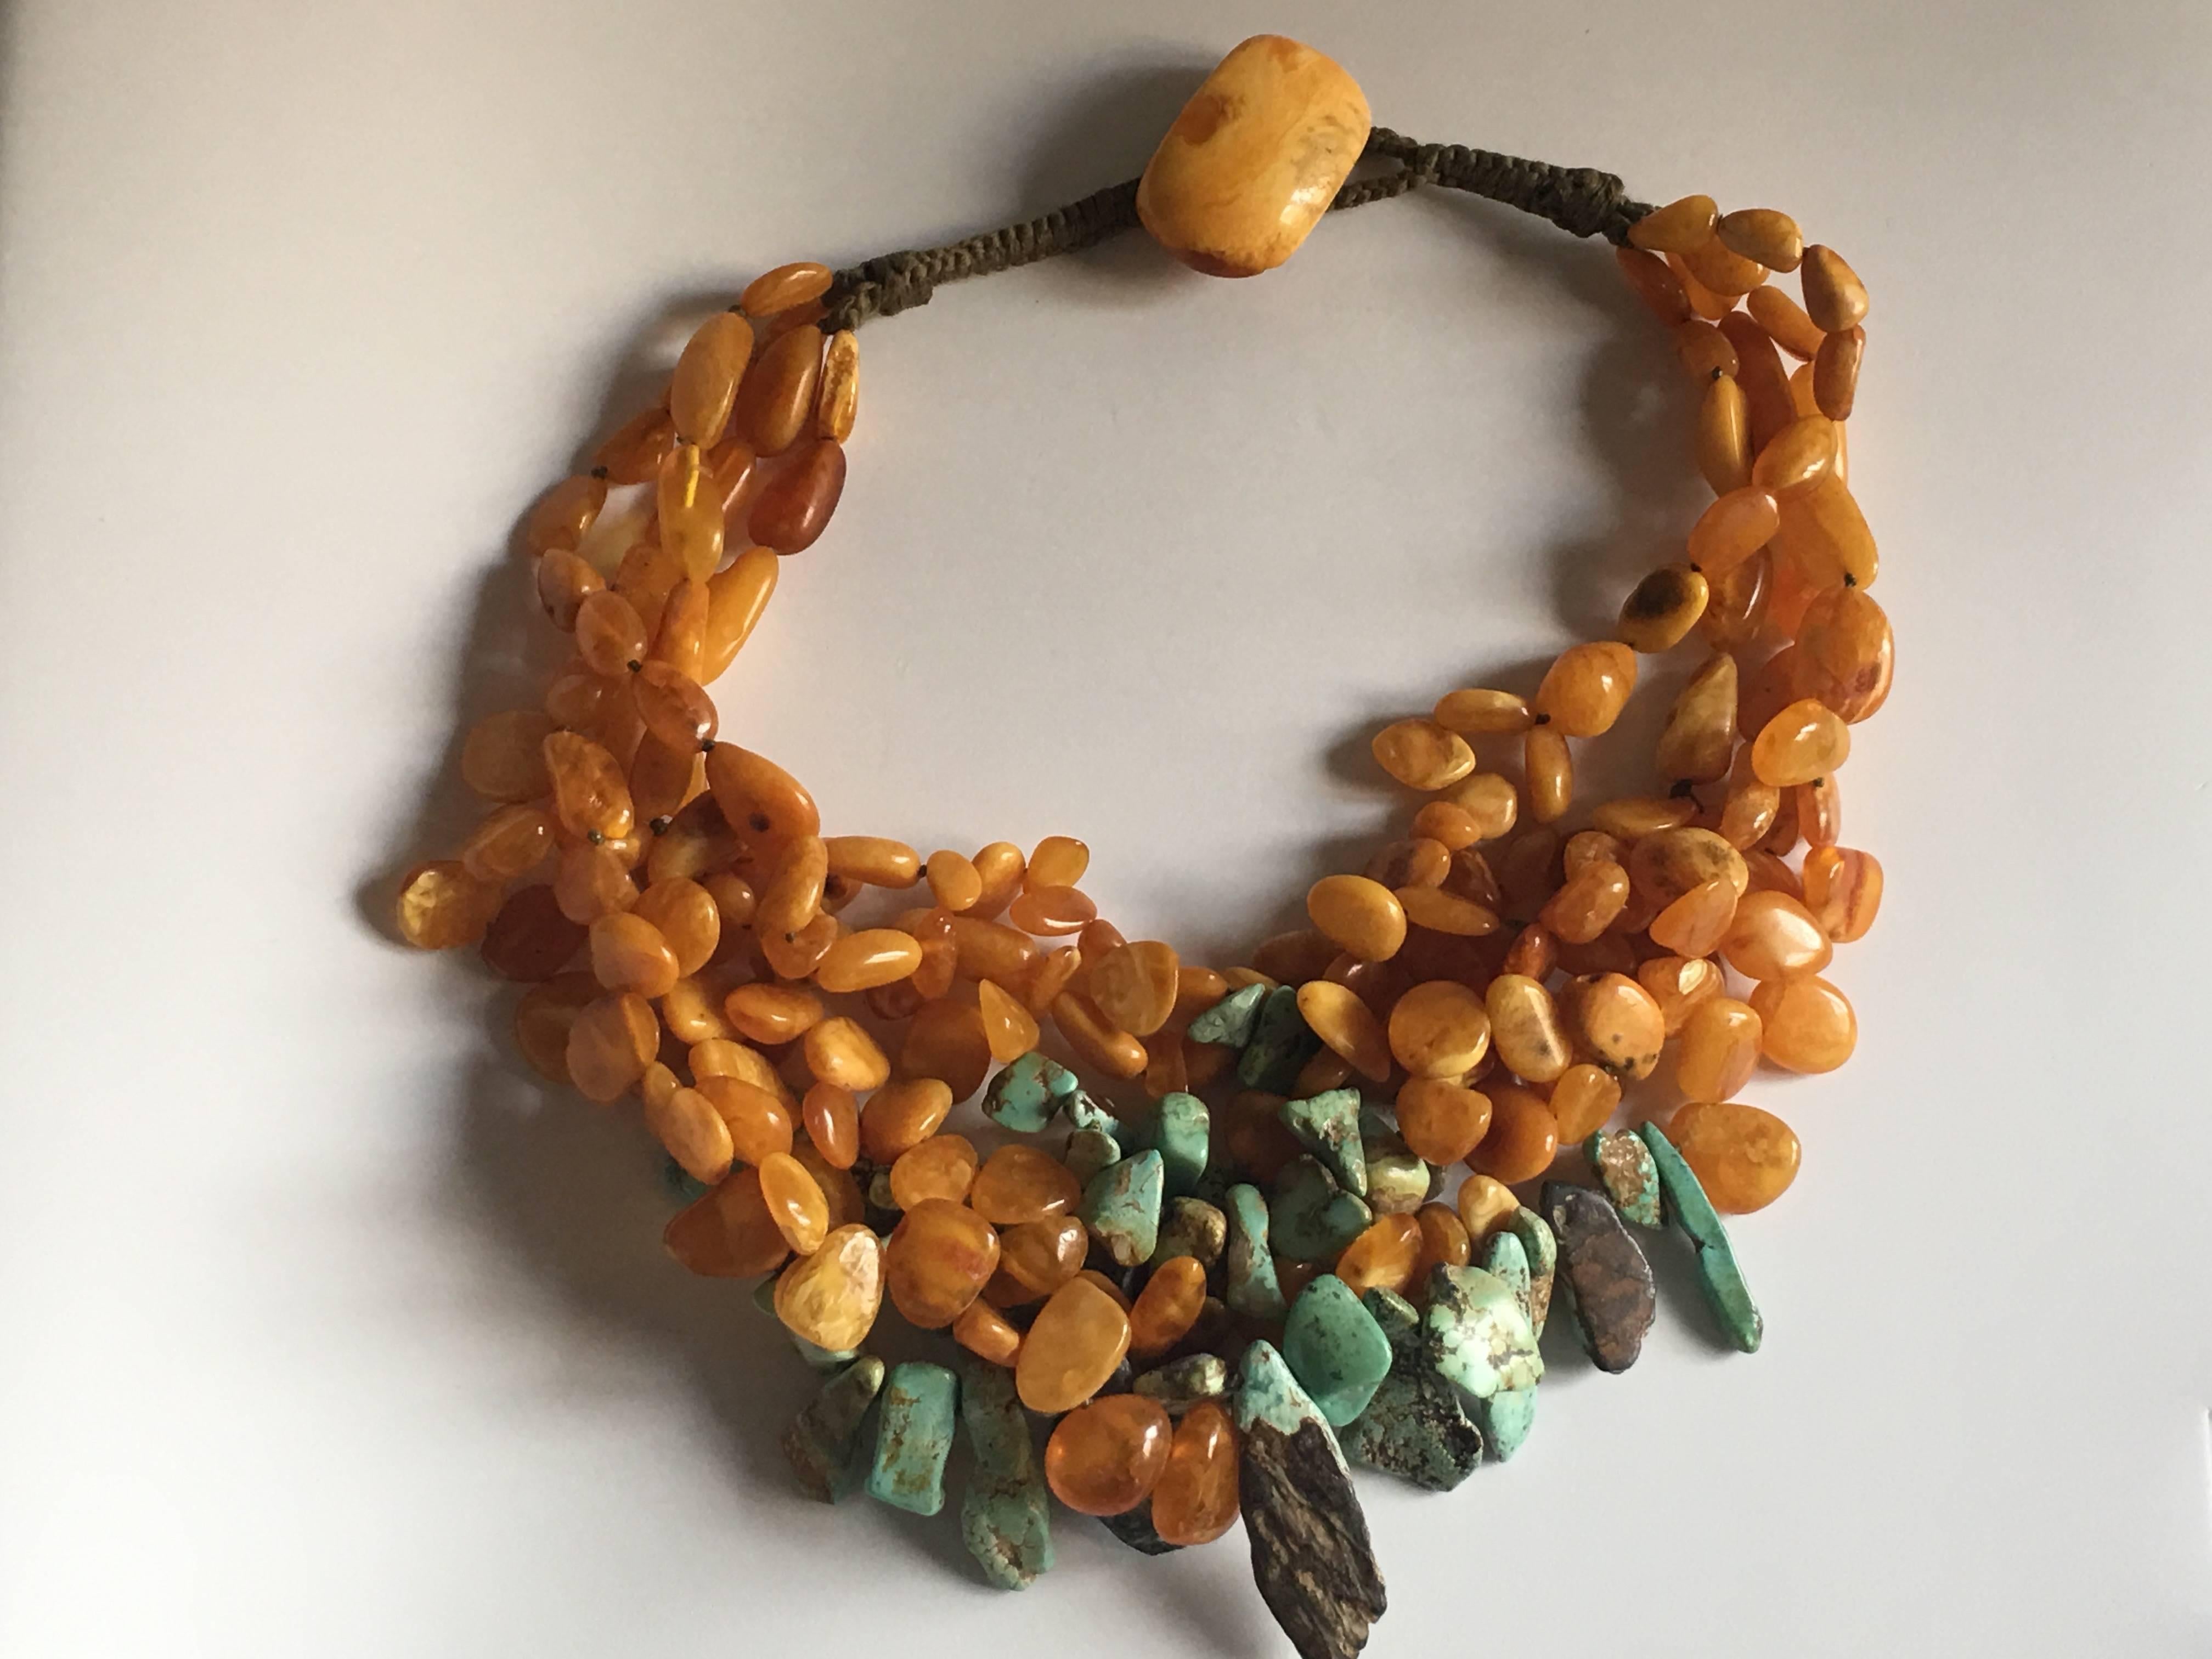 Necklace with antiques Baltic yellow amber irregular  beads, turquoise antiques drops.
Big button of amber ad a closure.
Total lenght 47cm.
All Giulia Colussi jewelry is new and has never been previously owned or worn. Each item will arrive at your